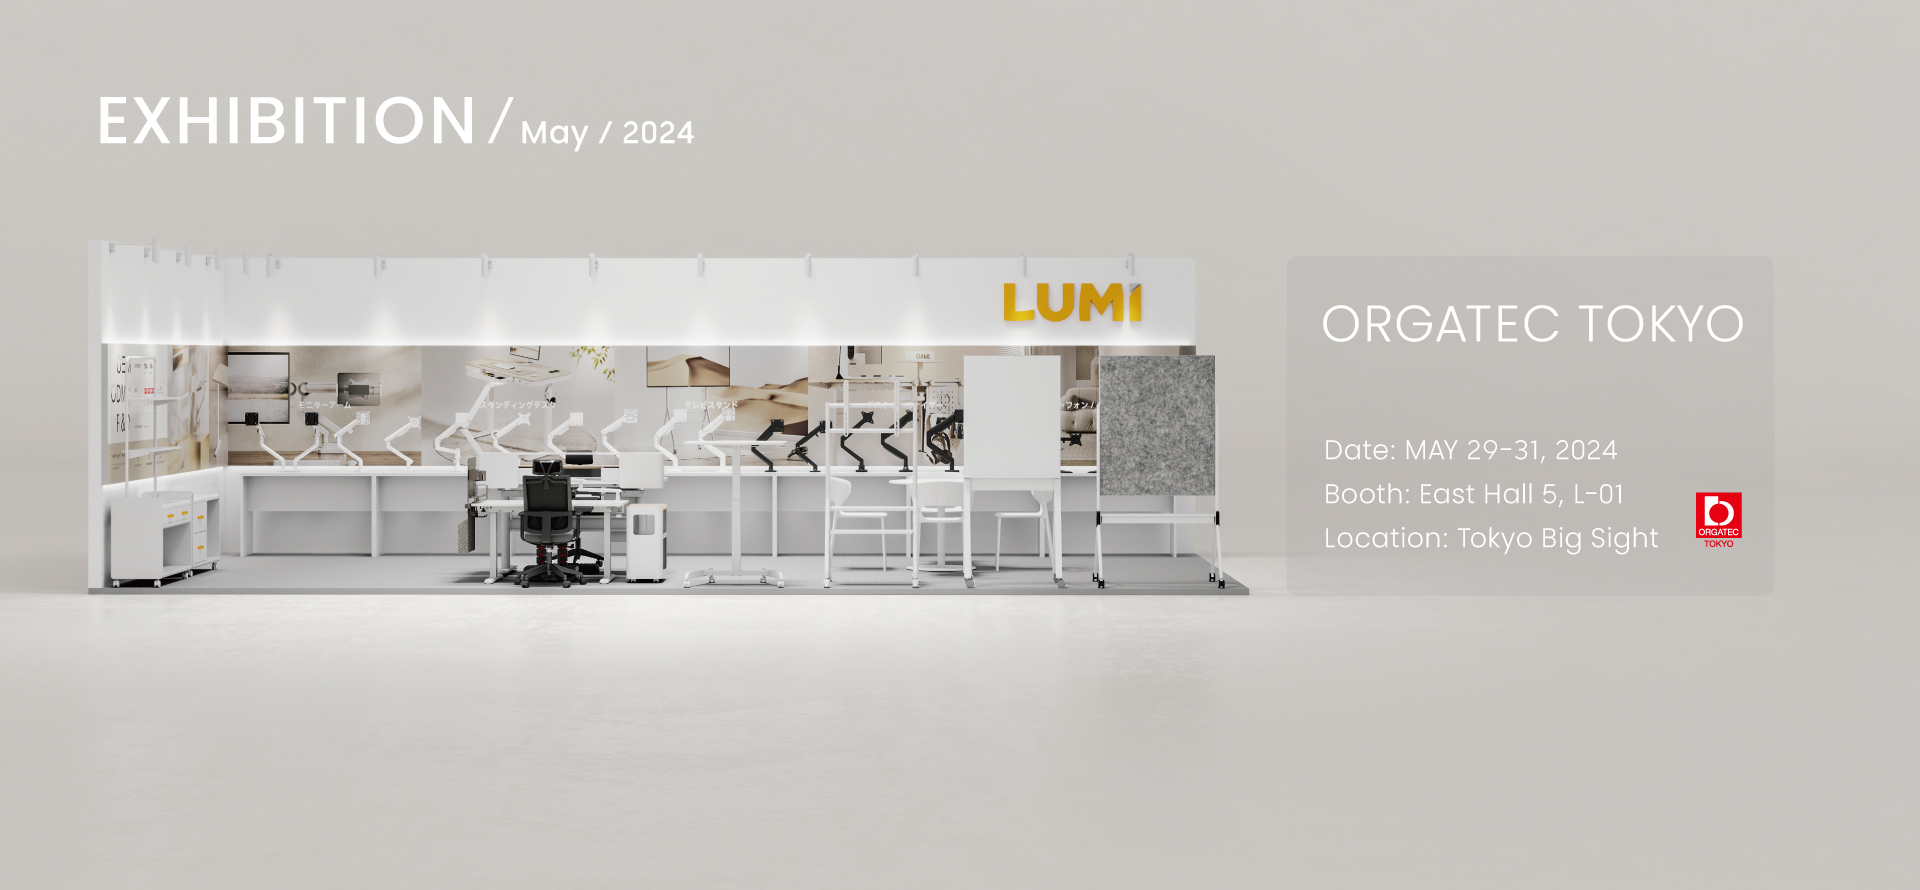 Welcome to LUMI Booth